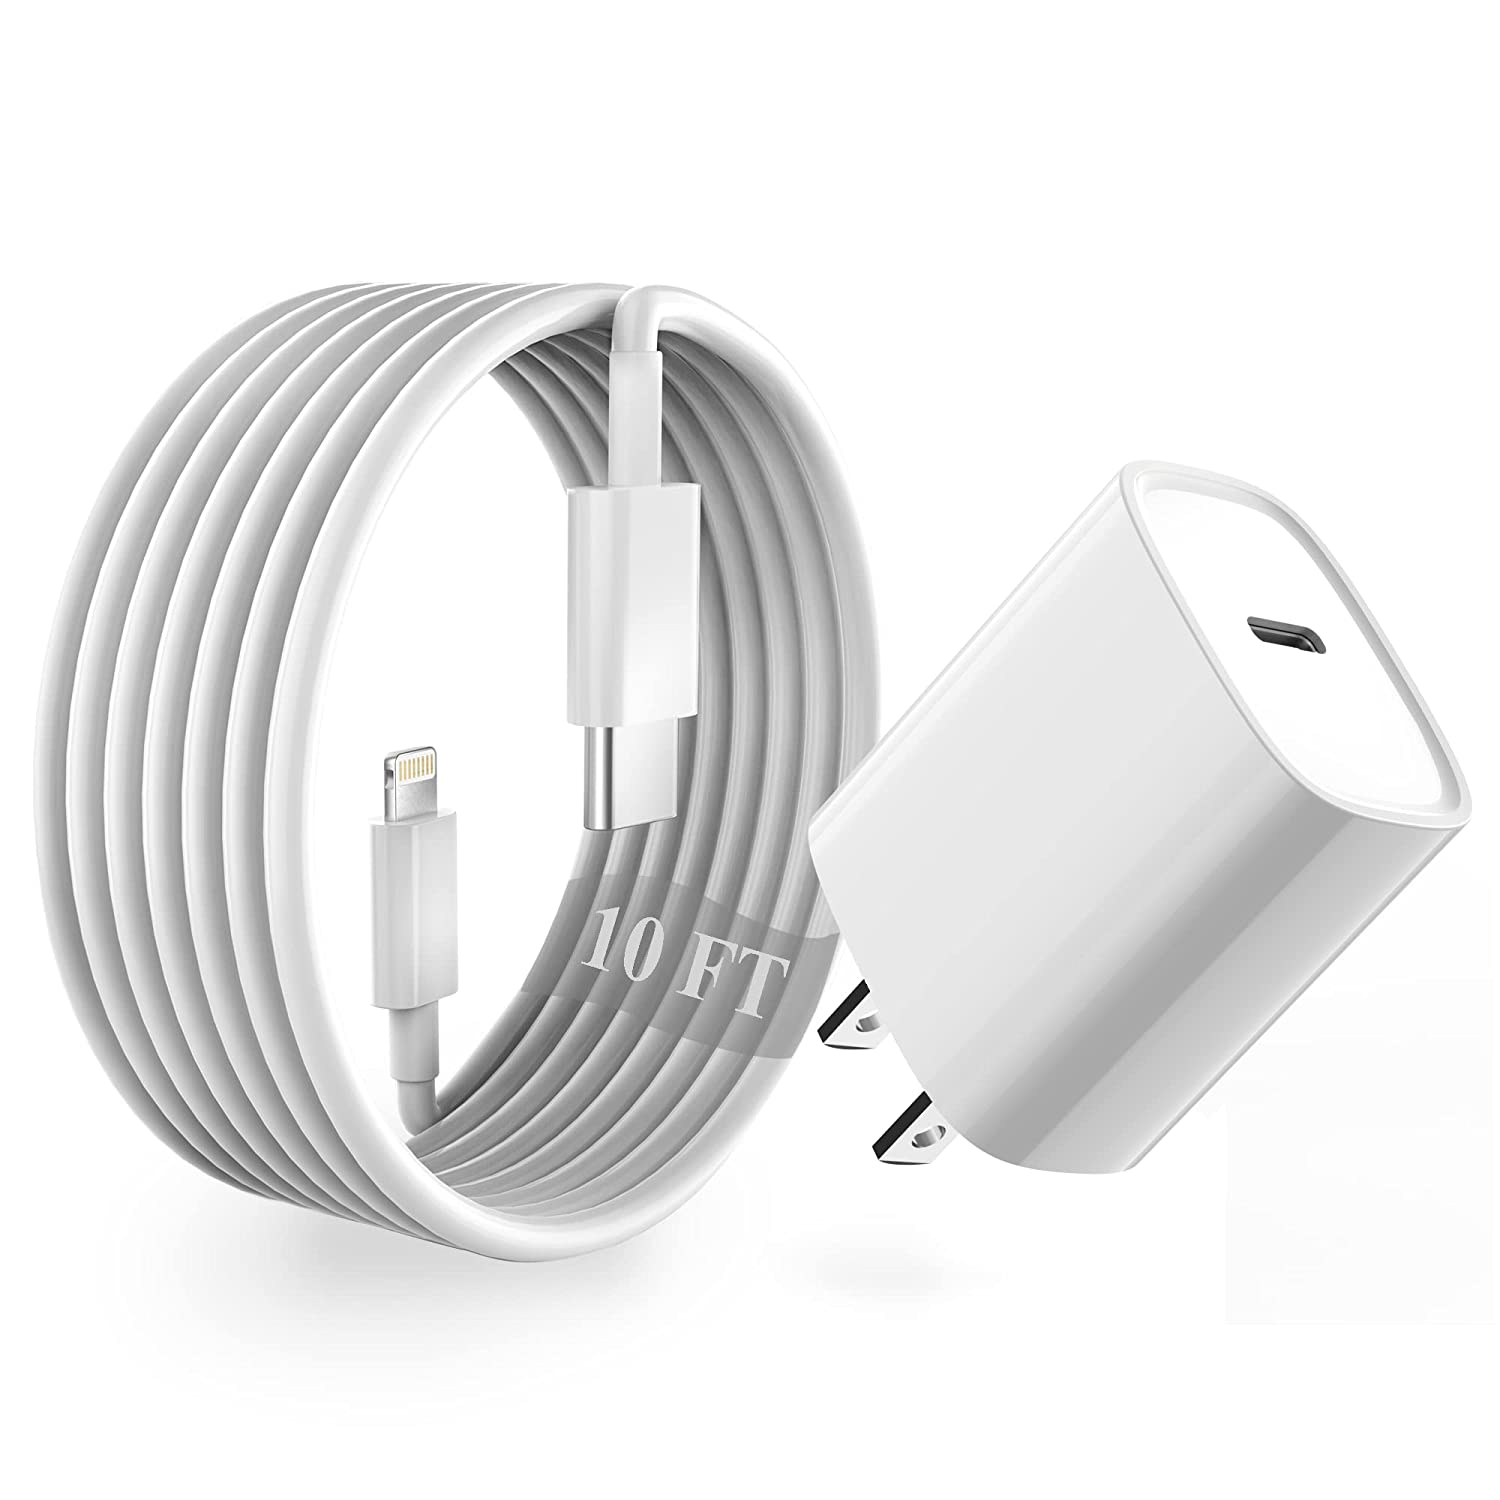 Double fast Chargeur COMPLET 20W Ultra Rapide CABLE TYPE C POUR IPHONE 11 A  13 PRO MAX